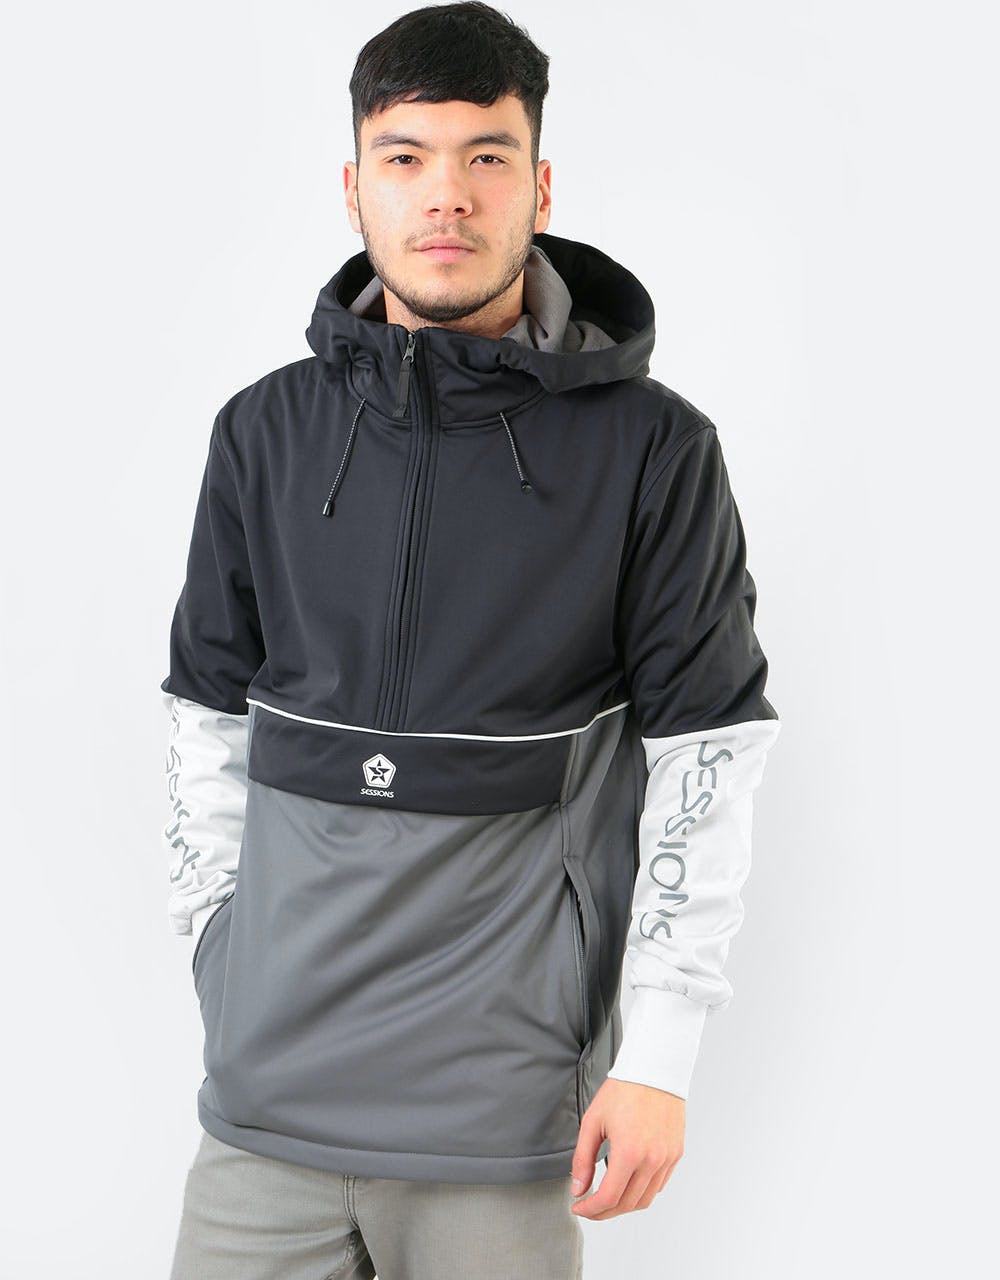 Sessions Recharge Bonded Pullover Hoodie - Marriner